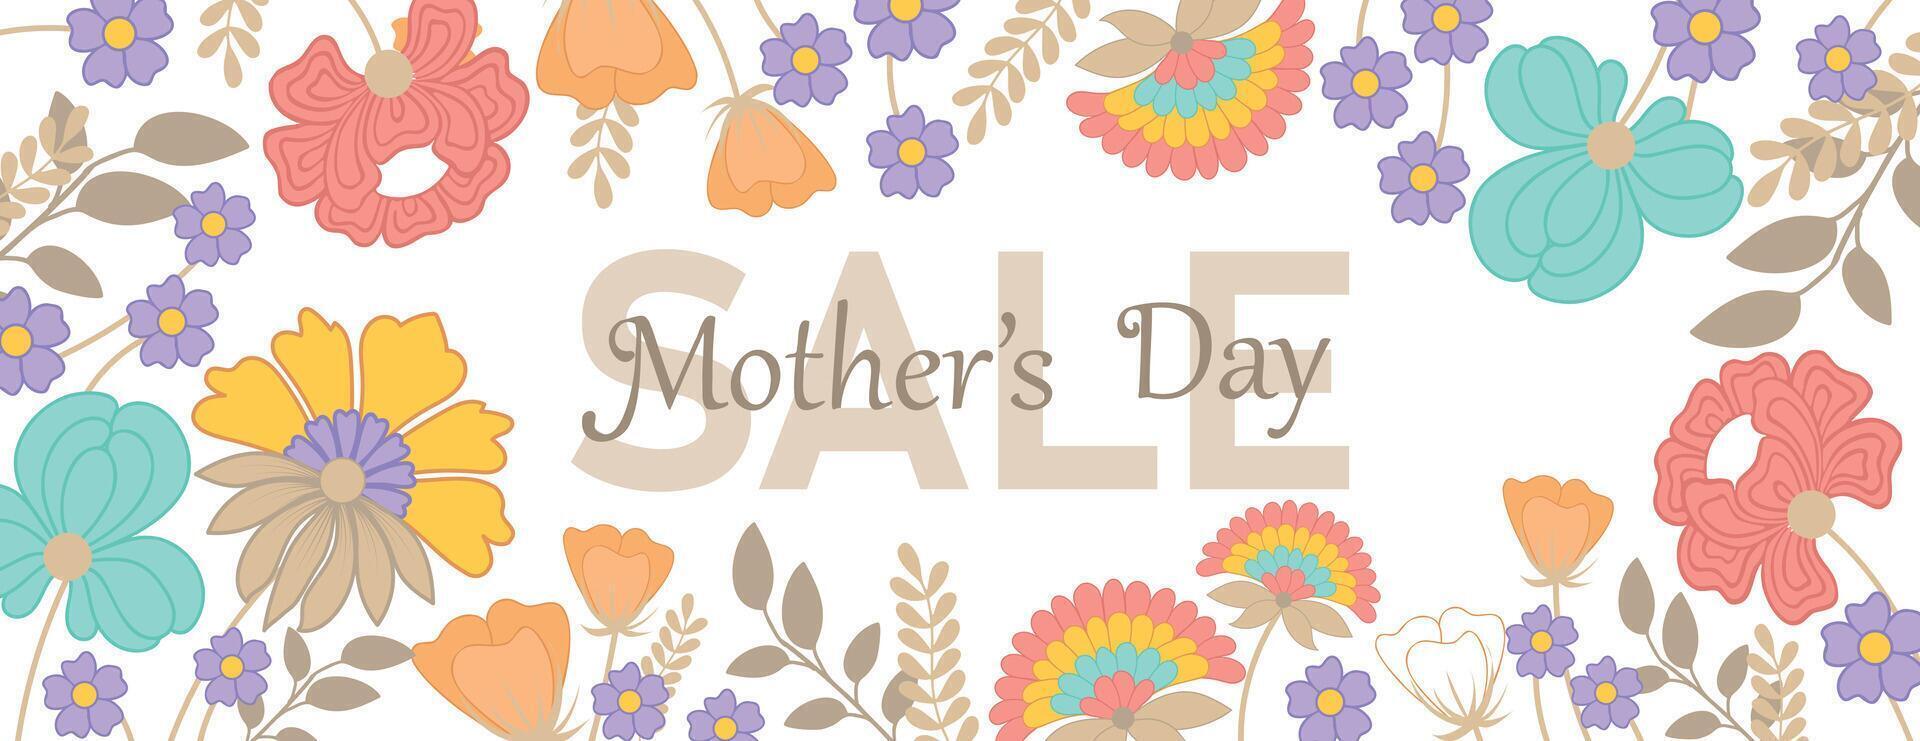 Mother's day sale banner vector